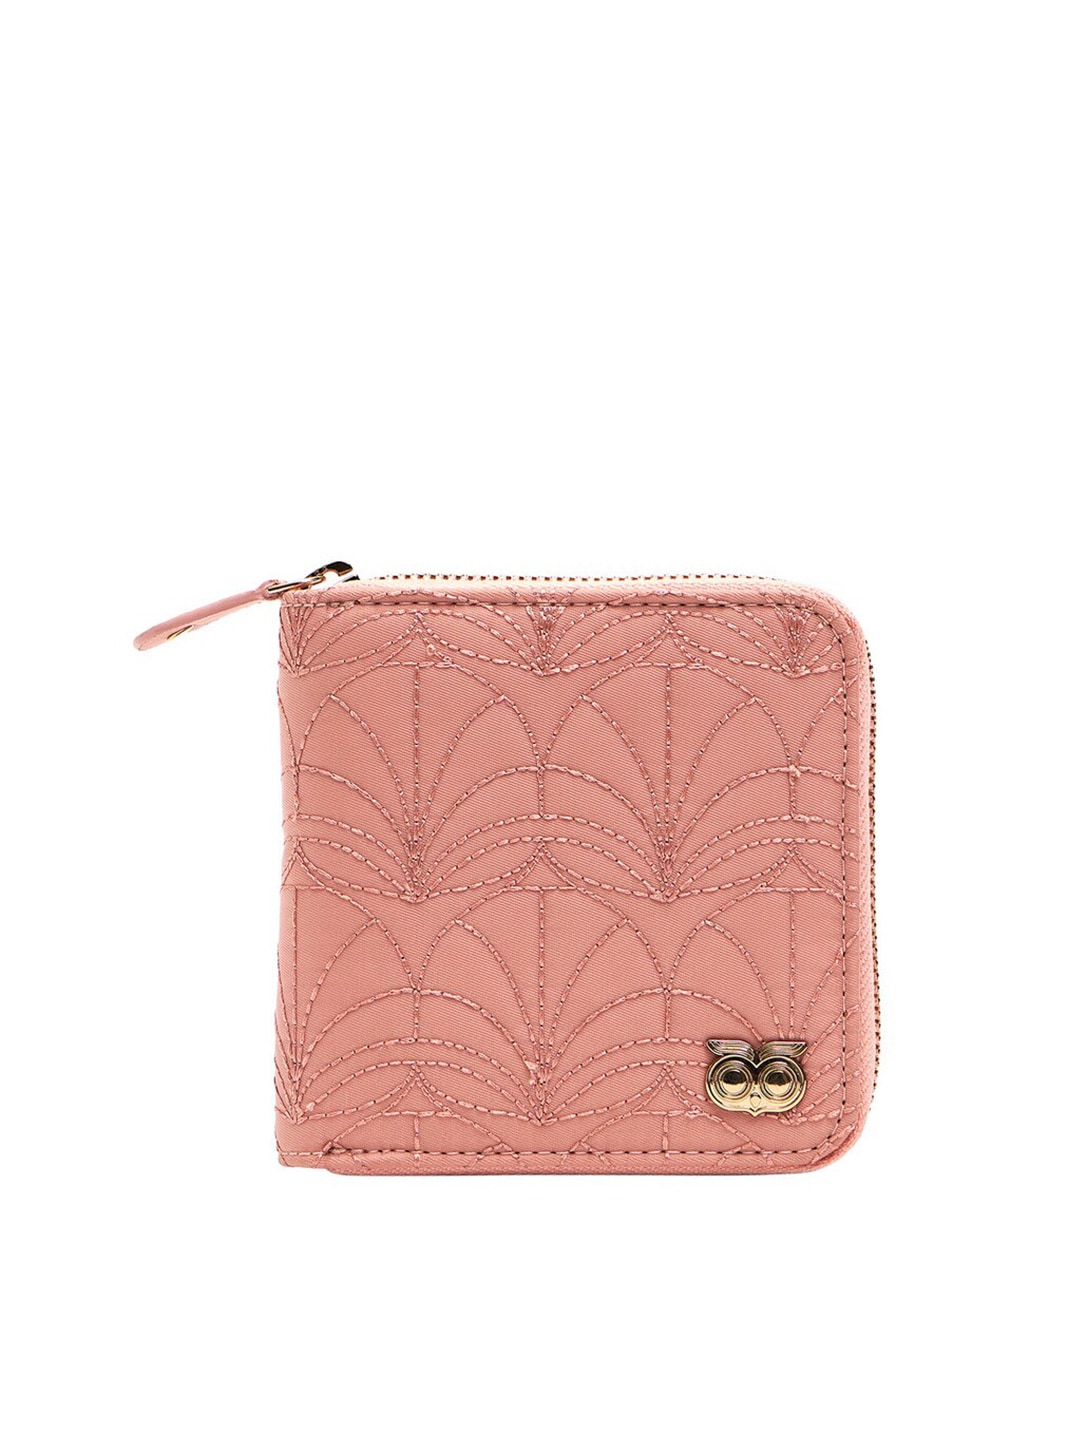 Chumbak Women Pink & Gold-Toned Floral Textured PU Two Fold Wallet Price in India